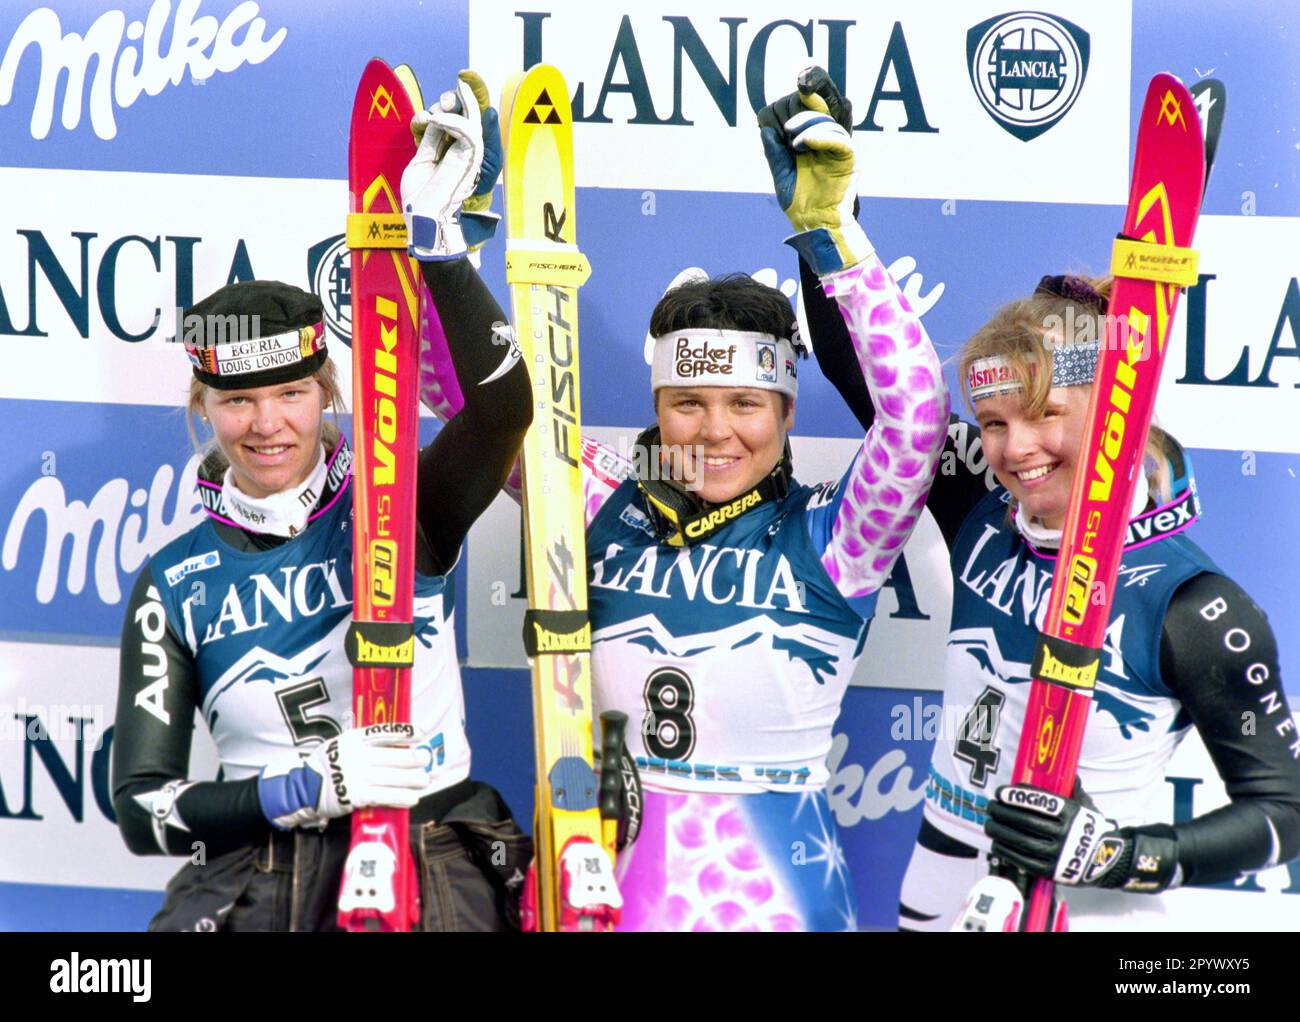 SKI ALPIN SEASON 96/97 WM 1997 Sestriere Super G Women 11.02.1997 Katja SEIZINGER (GER left), Isolde KOSTNER (ITA) and Hilde GERG (right GER) at the award ceremony. PHOTO: WEREK Press Picture Agency xxNOxMODELxRELEASExx [automated translation]- AUSTRIA OUT Stock Photo